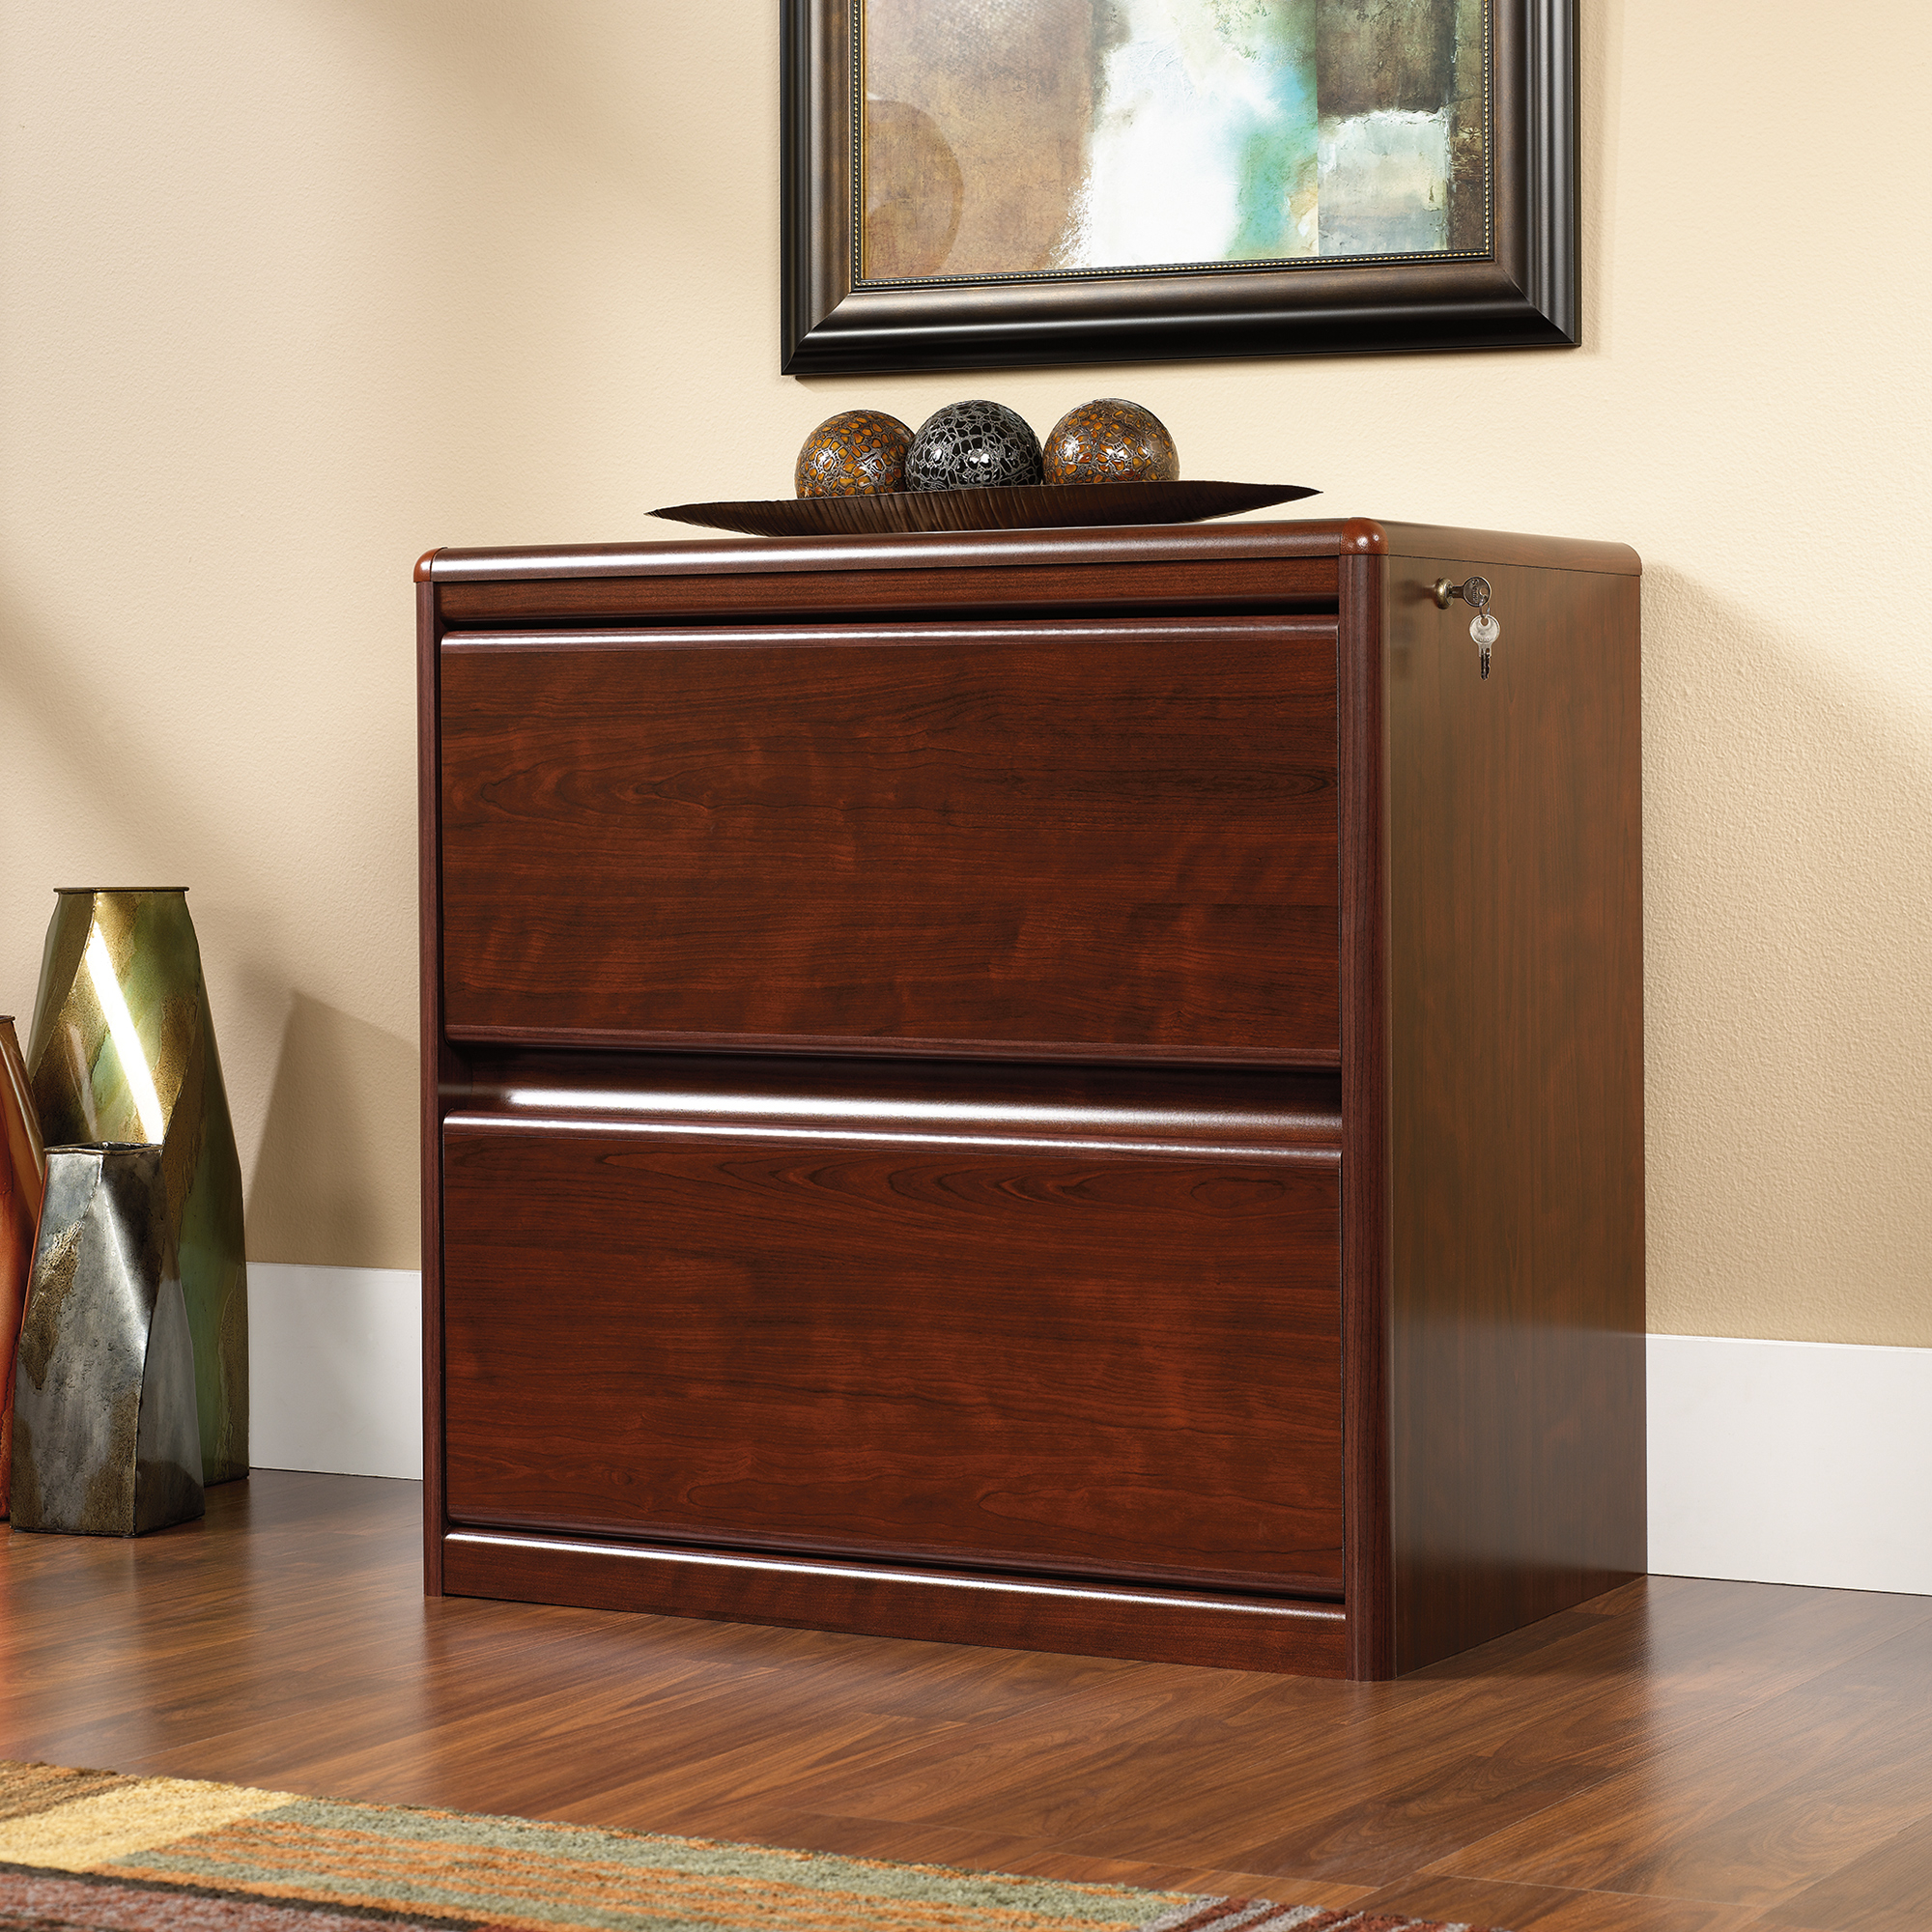 Sauder Cornerstone Lateral File 107302 Sauder The Furniture Co intended for sizing 2000 X 2000